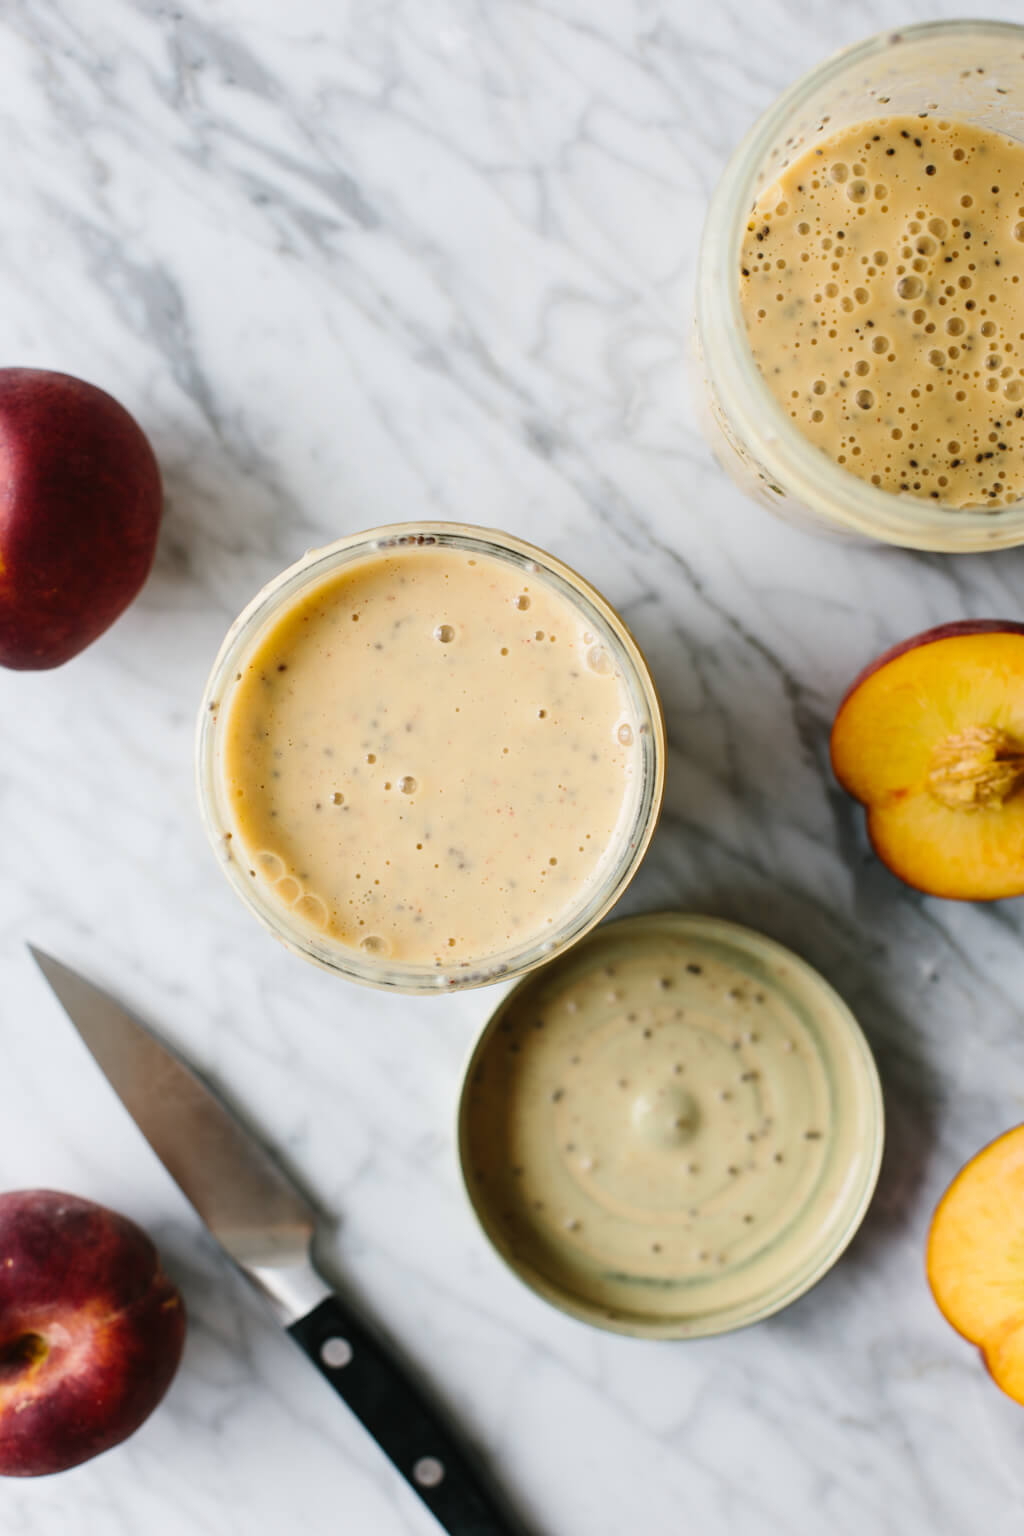 A delicious peach smoothie that makes for a healthy, breakfast smoothie when blended with yogurt and chia seeds. Make this with dairy or dairy-free.